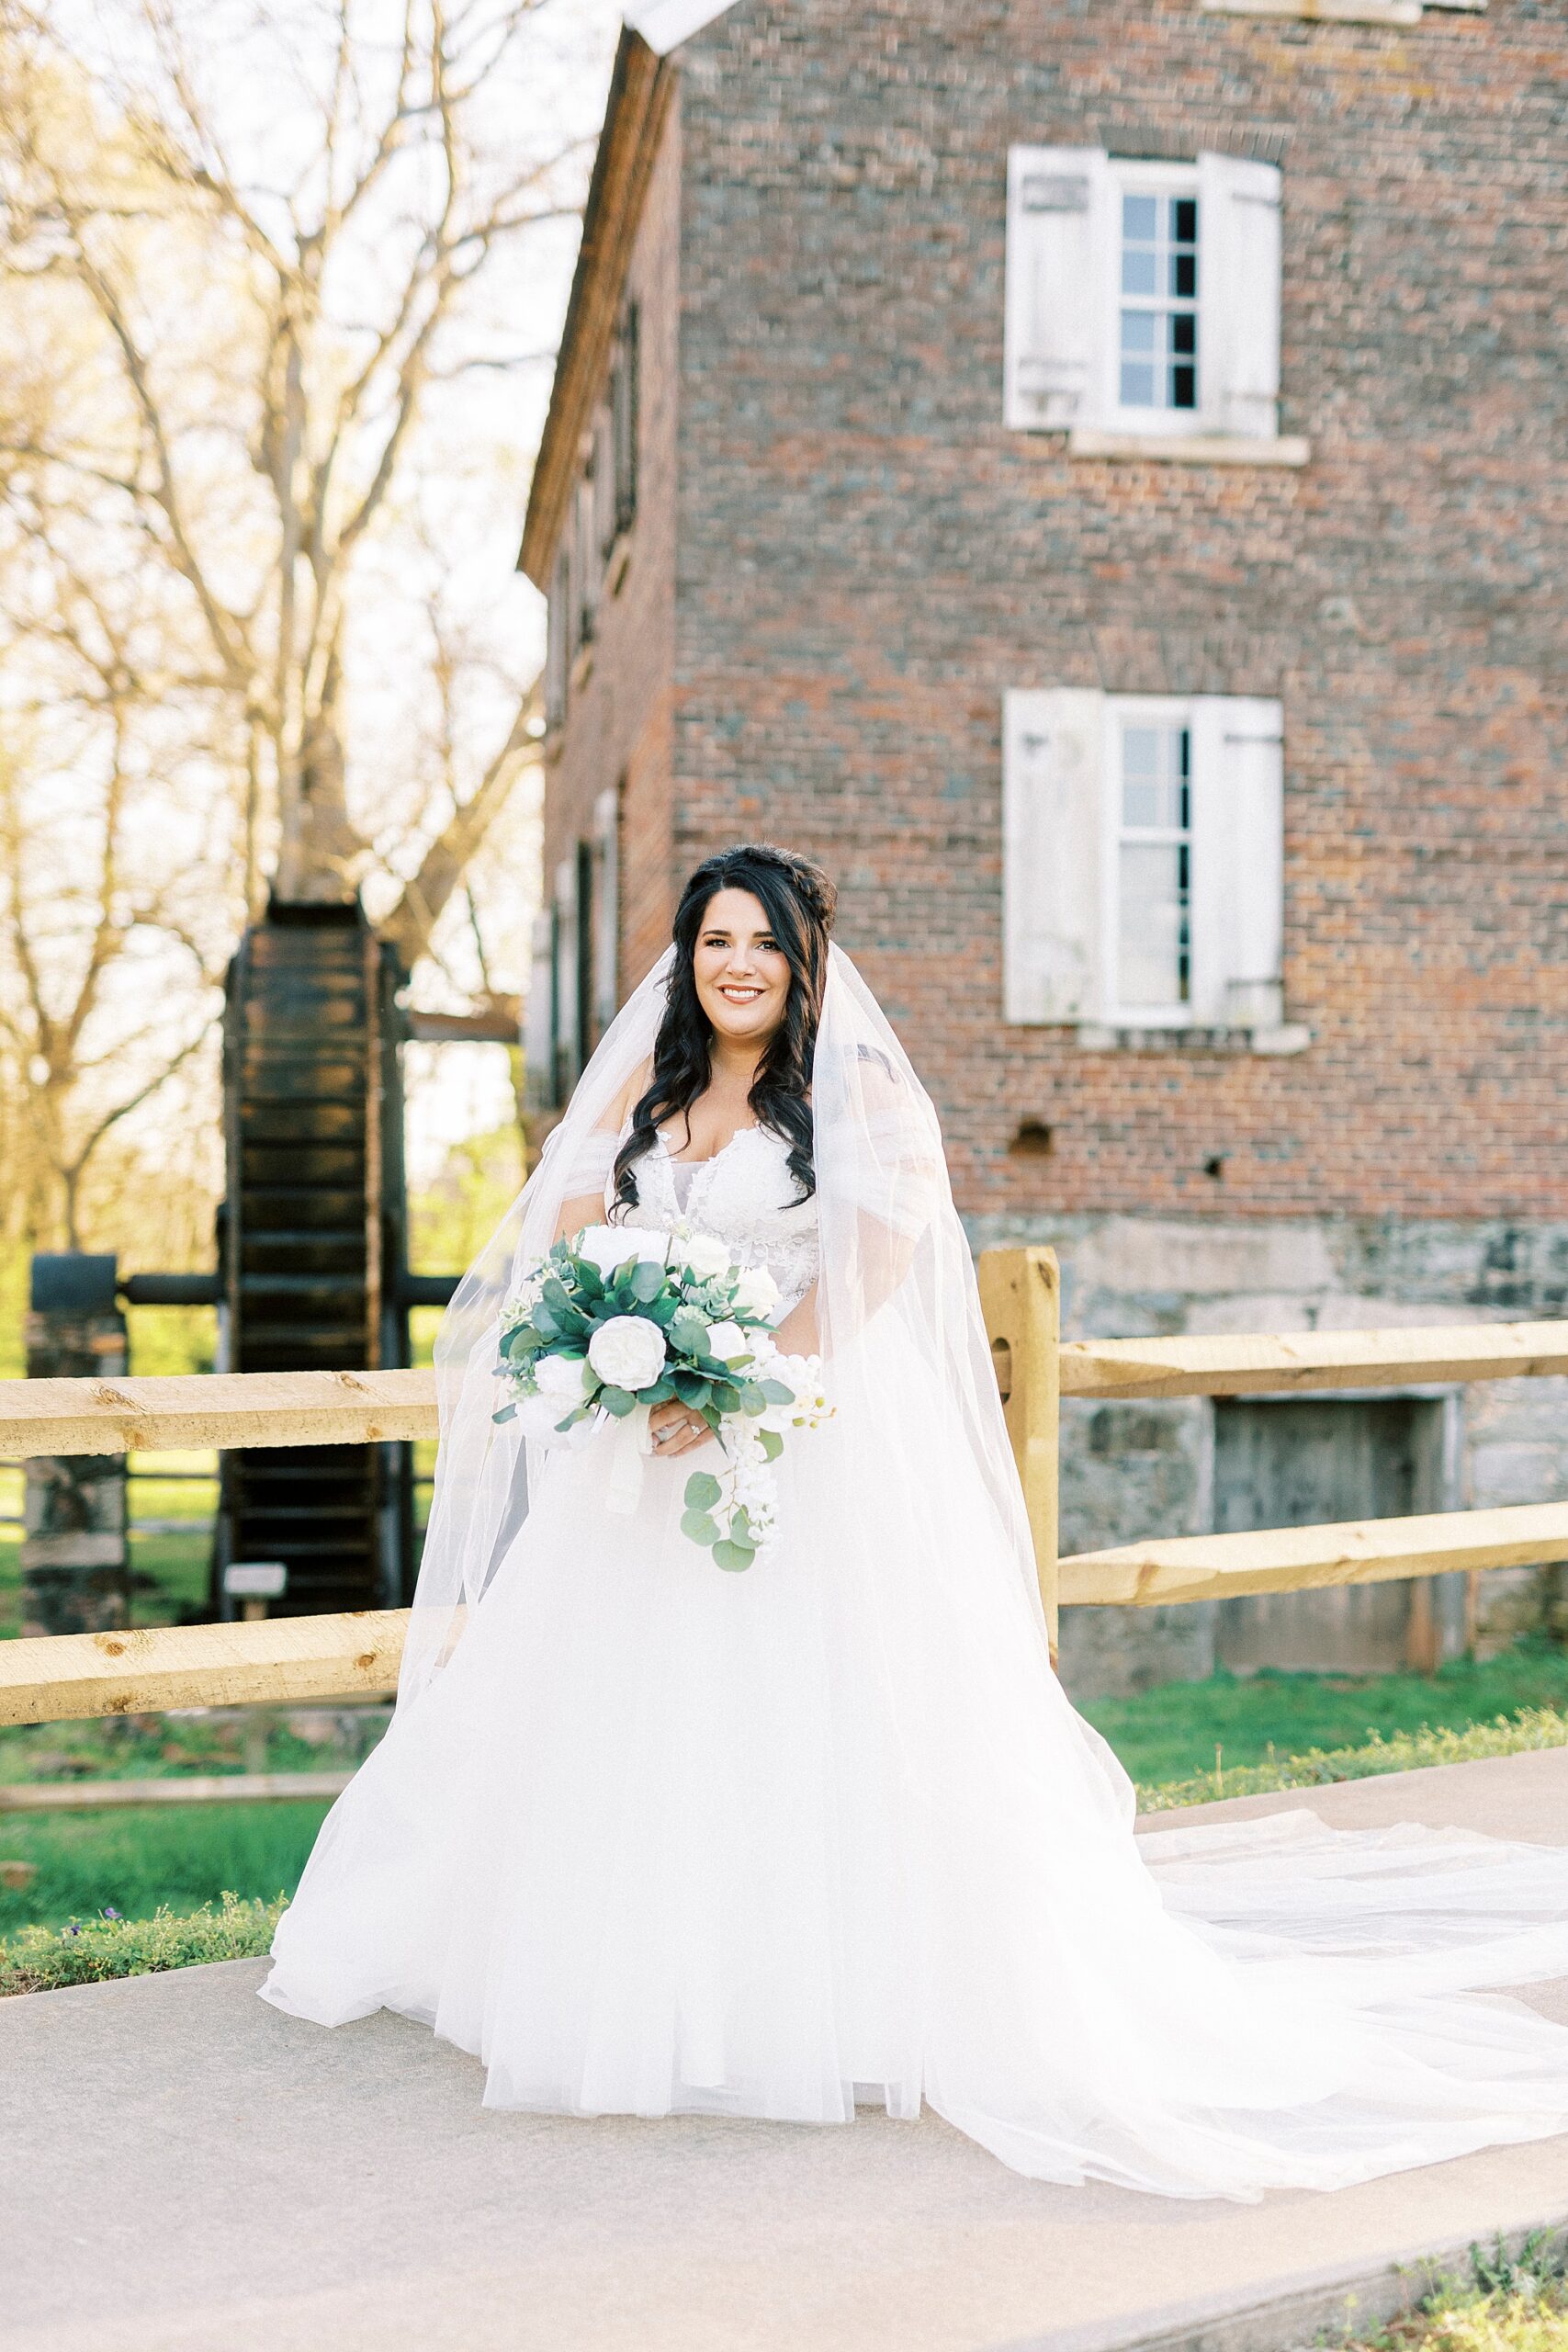 bride smiles holding bouquet of white flowers by brick building in Sloan Park